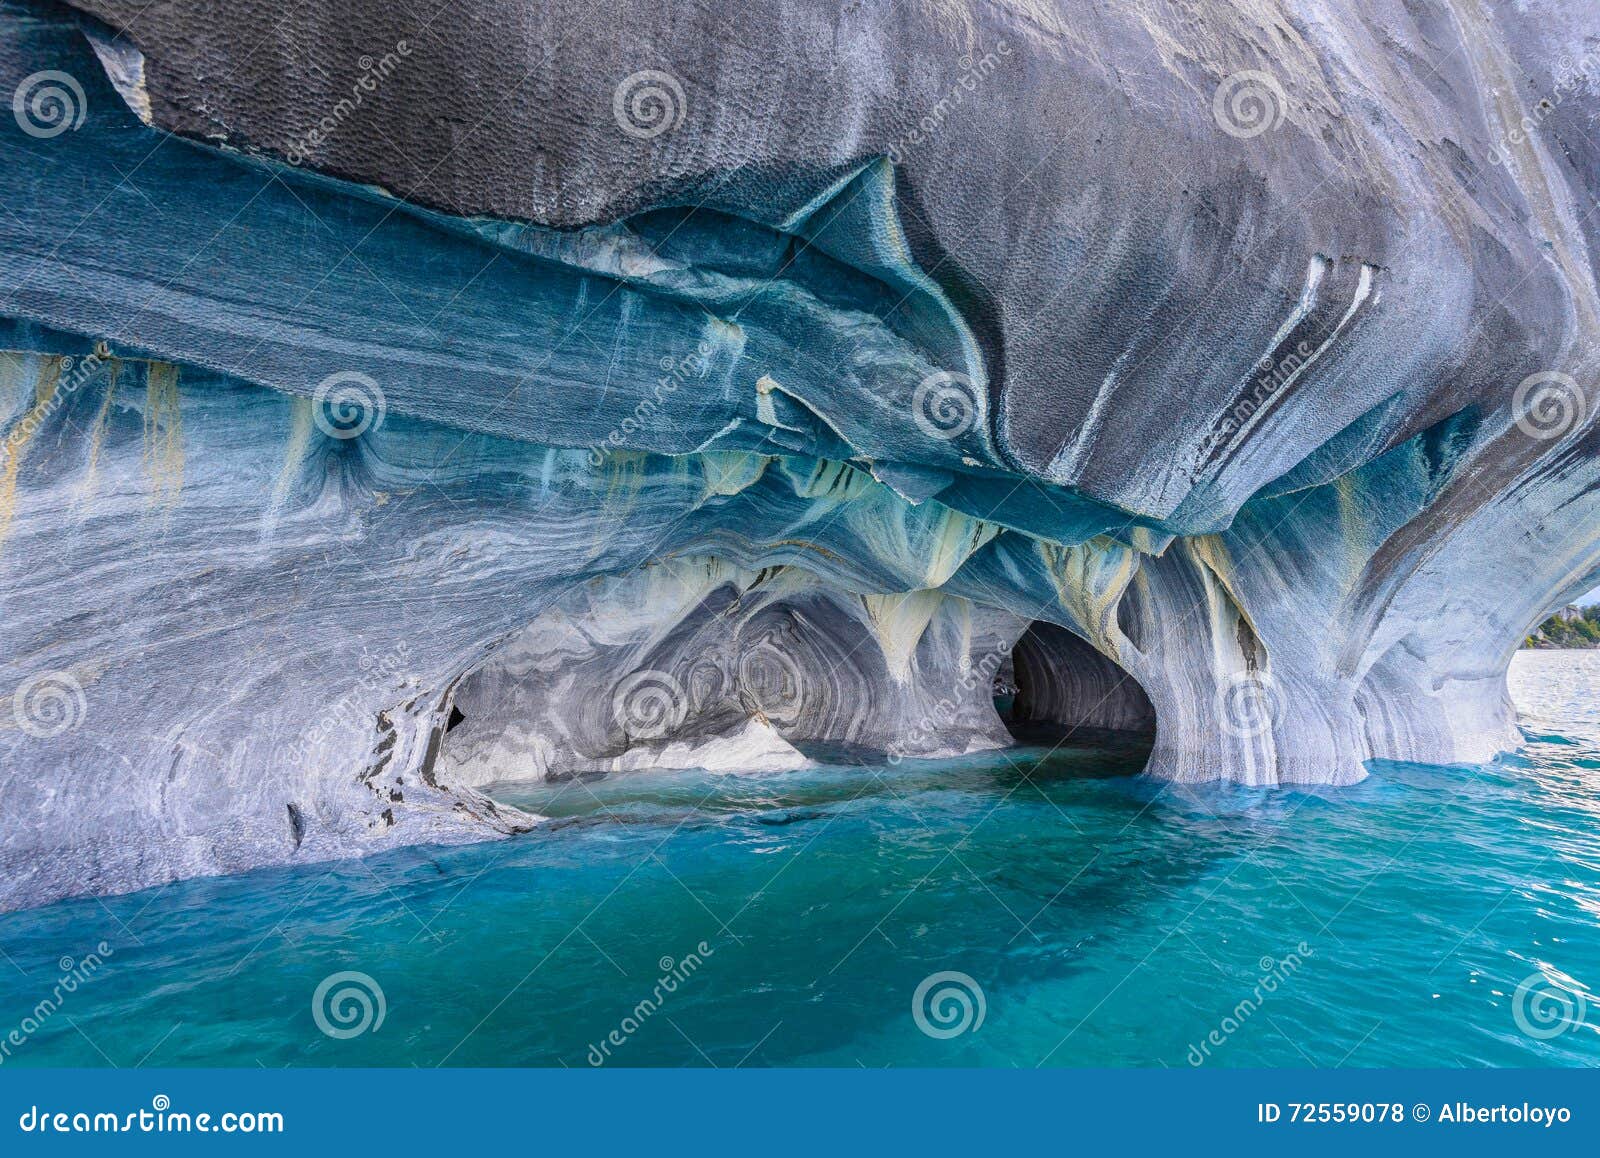 marble caves of lake general carrera (chile)